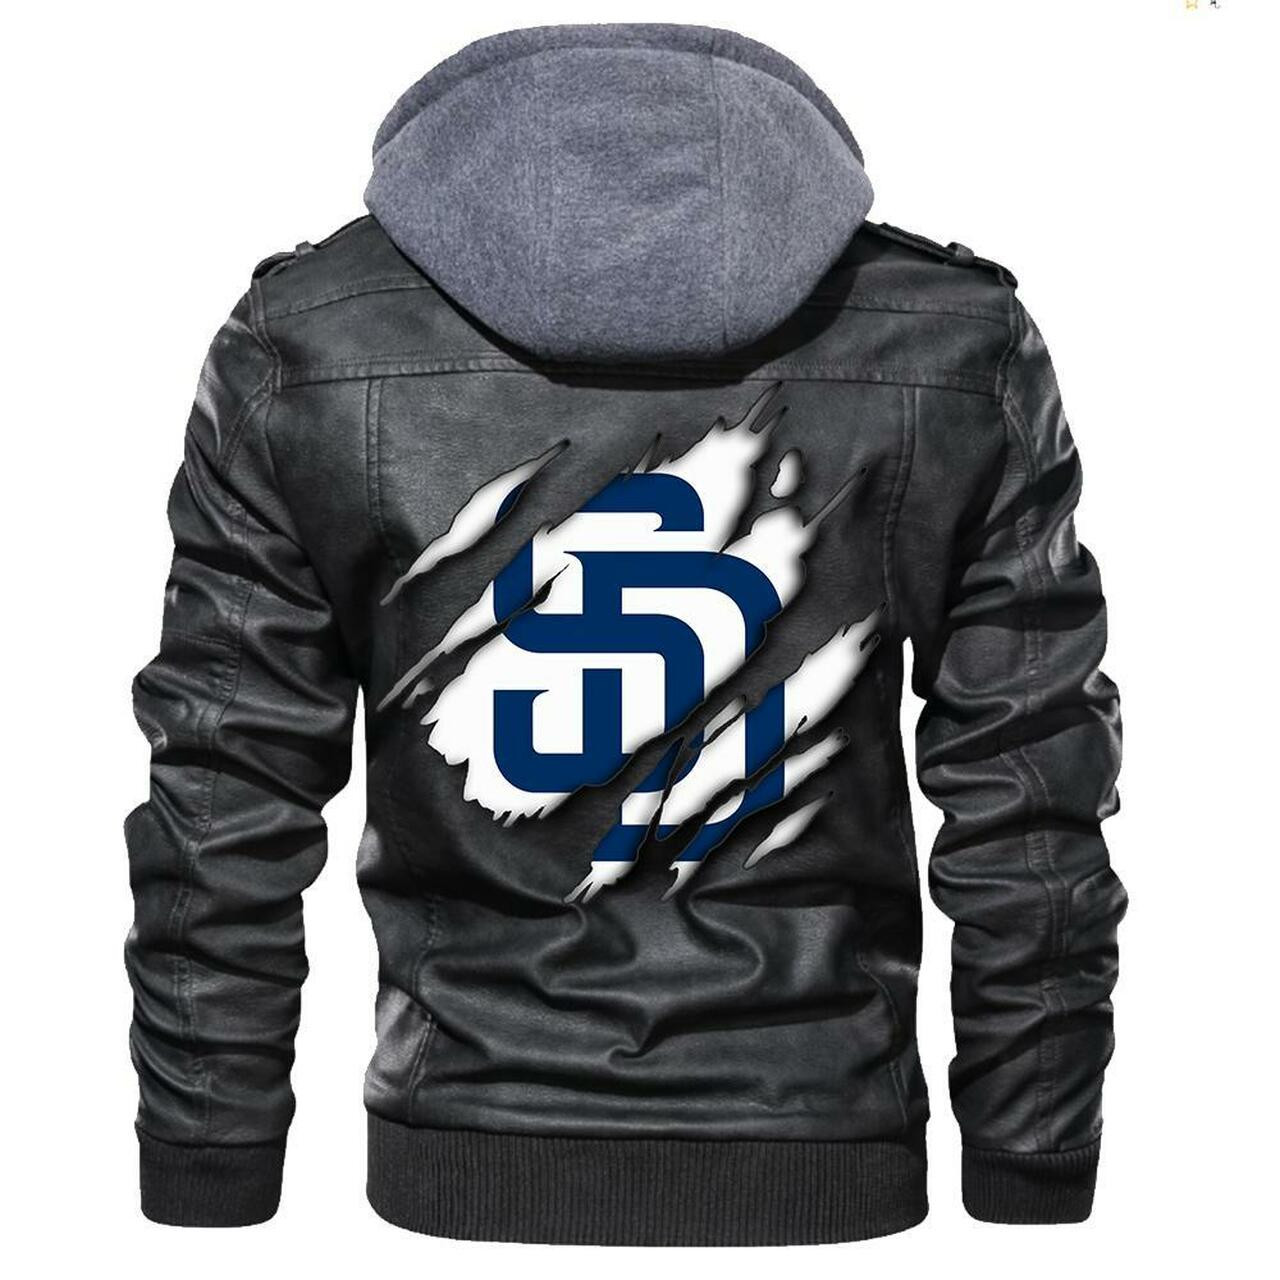 Check out and find the right leather jacket below 417